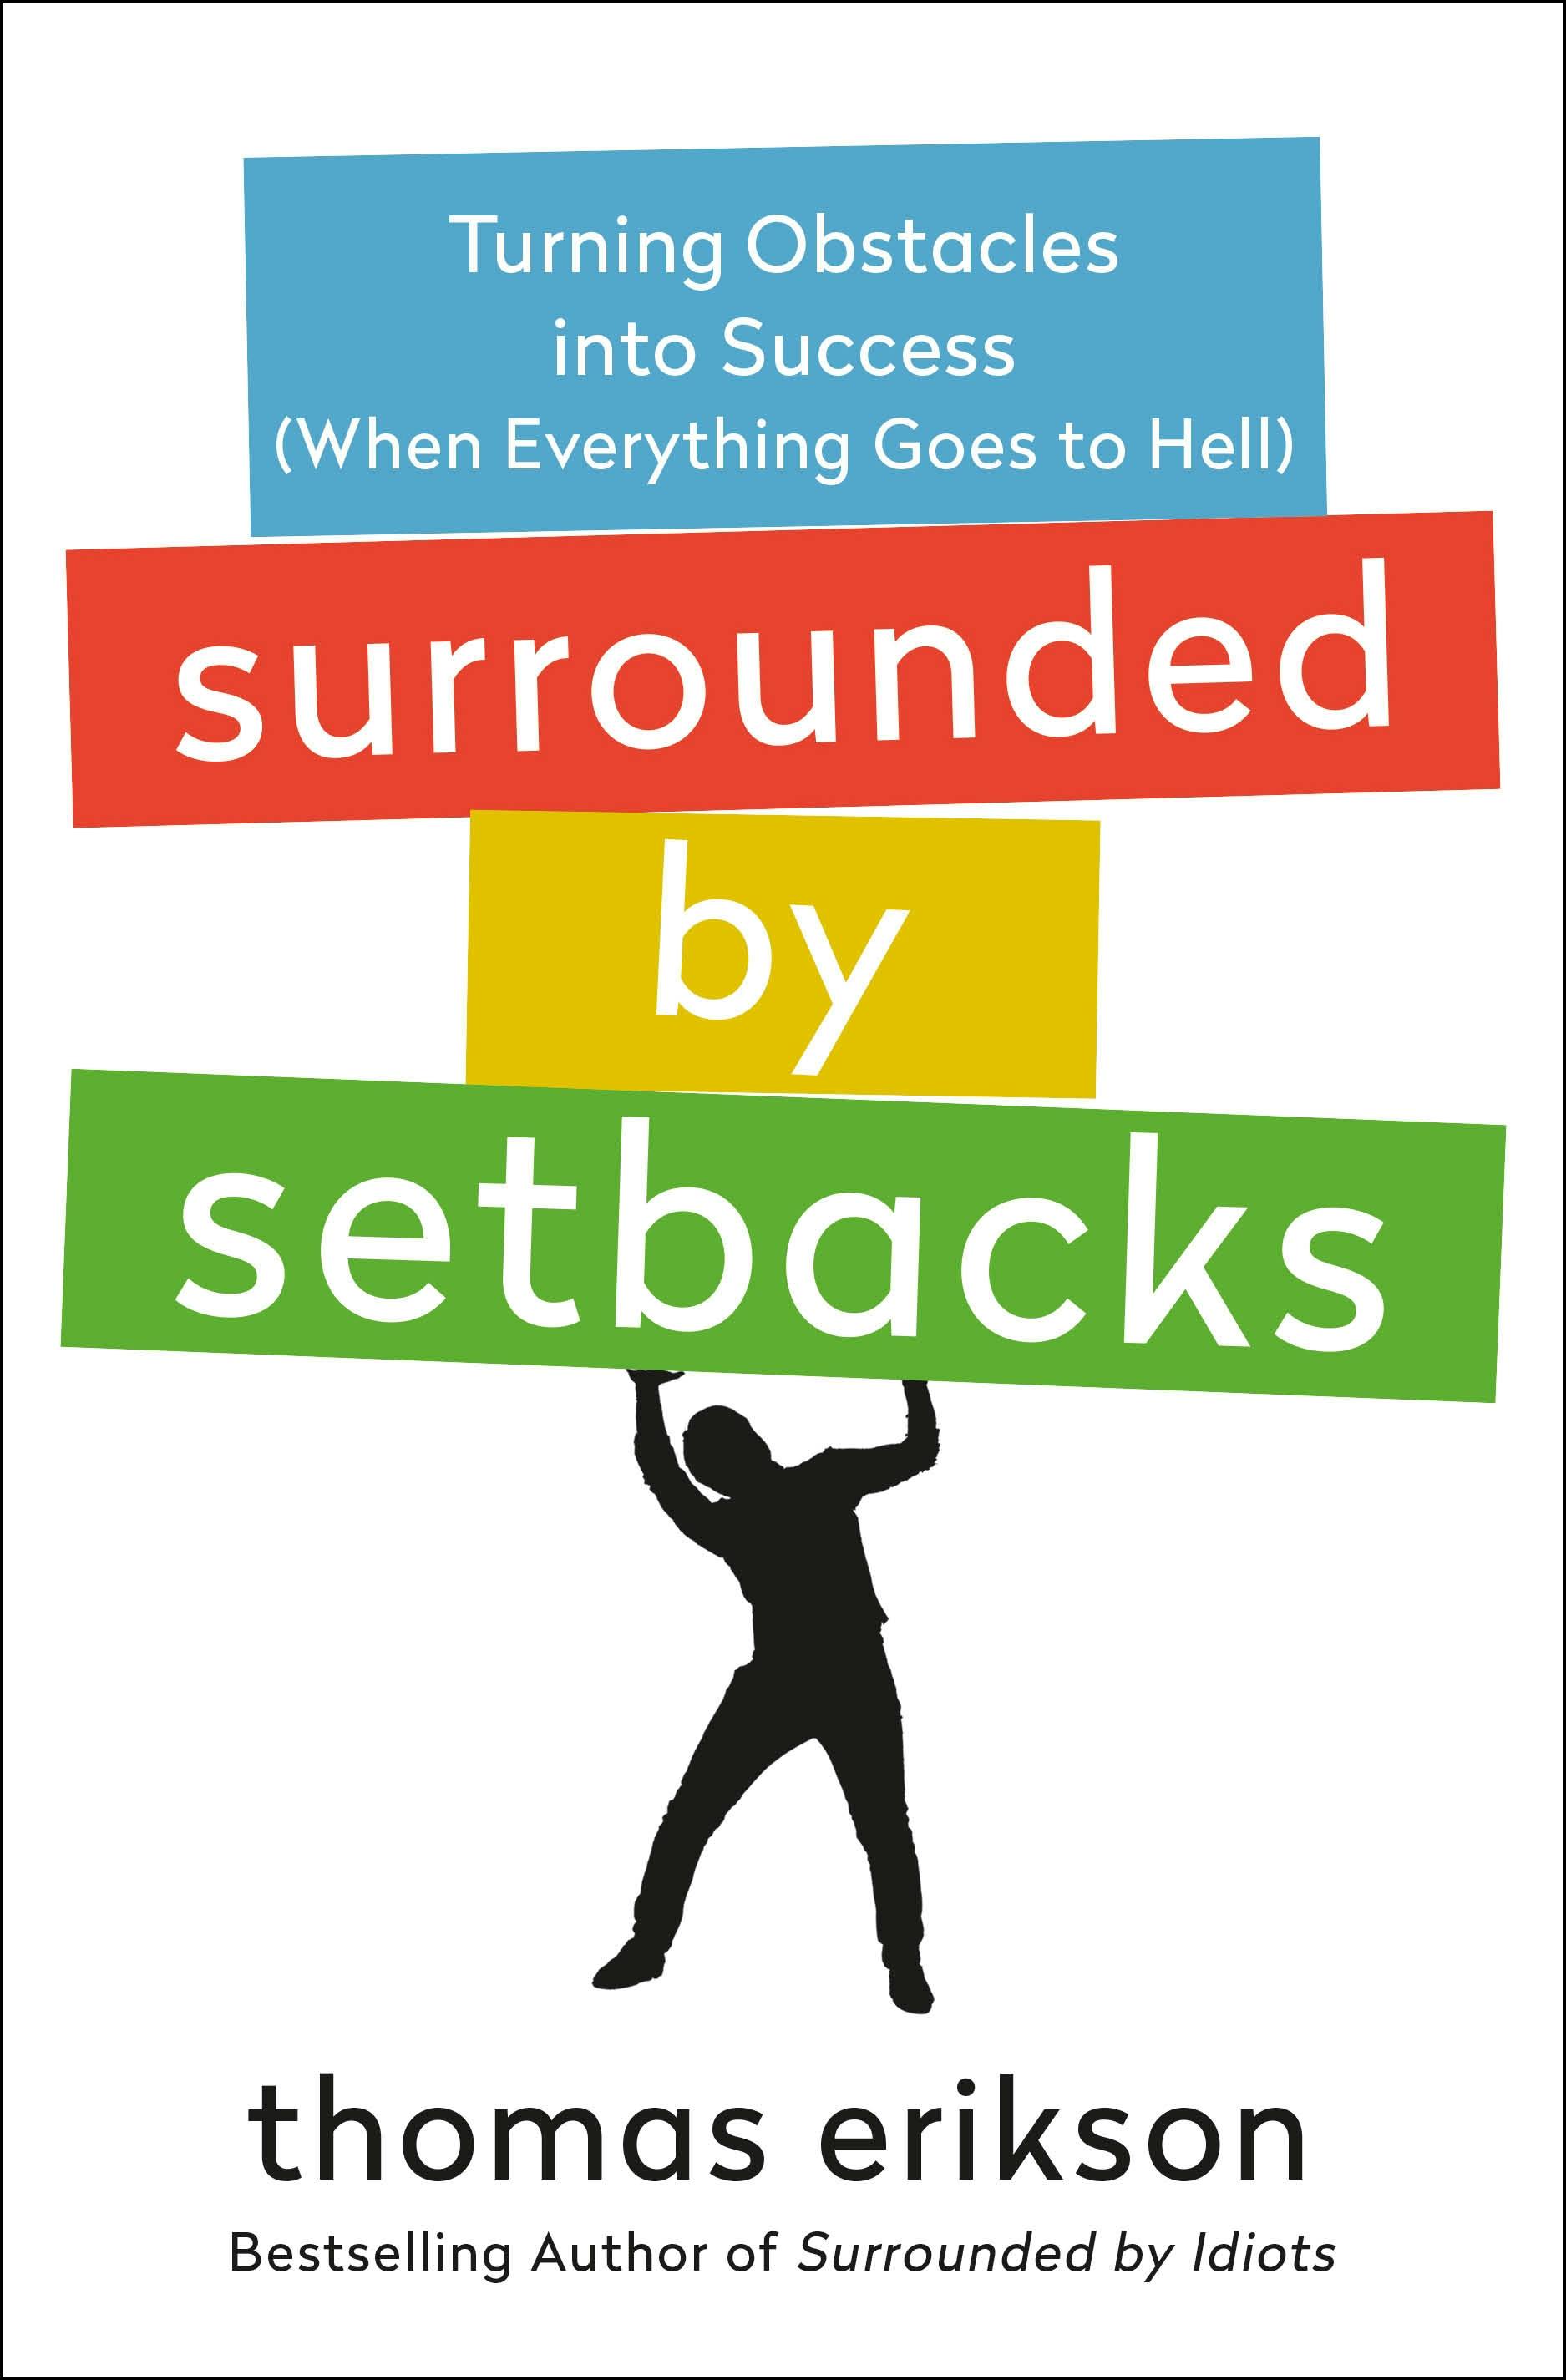 Image of Surrounded by Setbacks